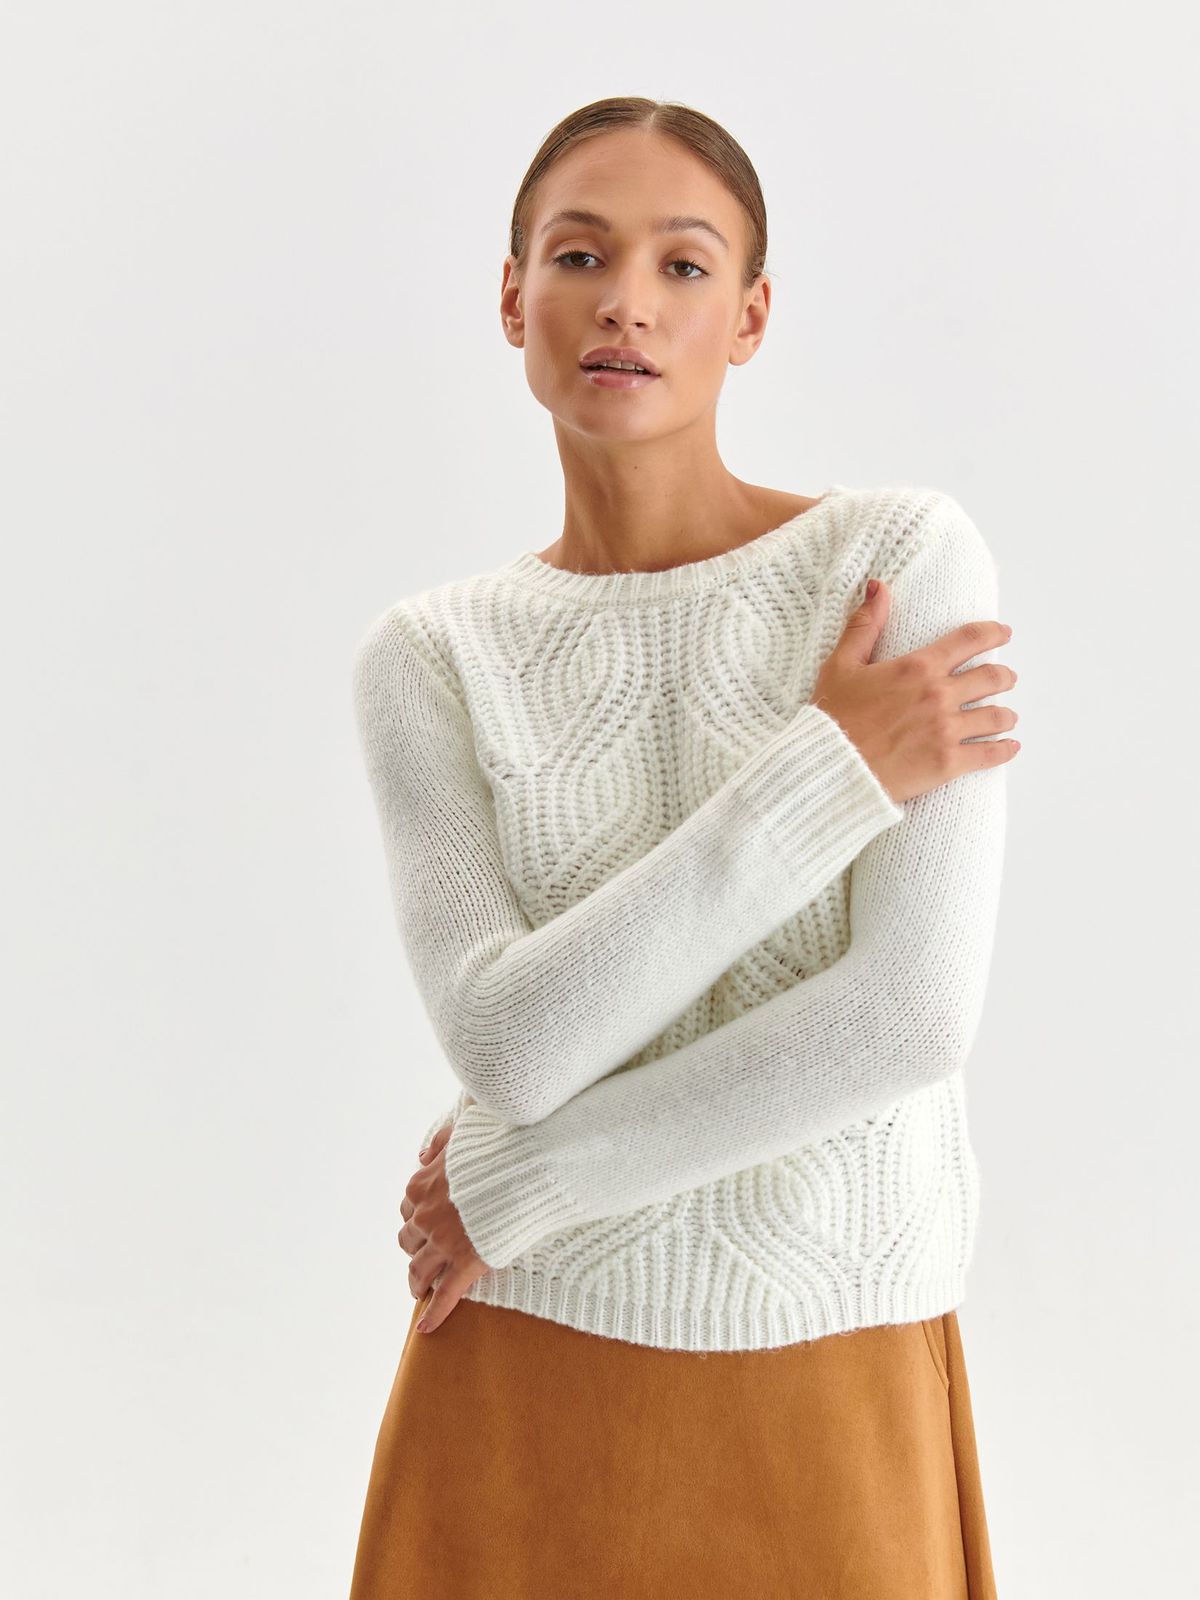 White sweater knitted loose fit neckline